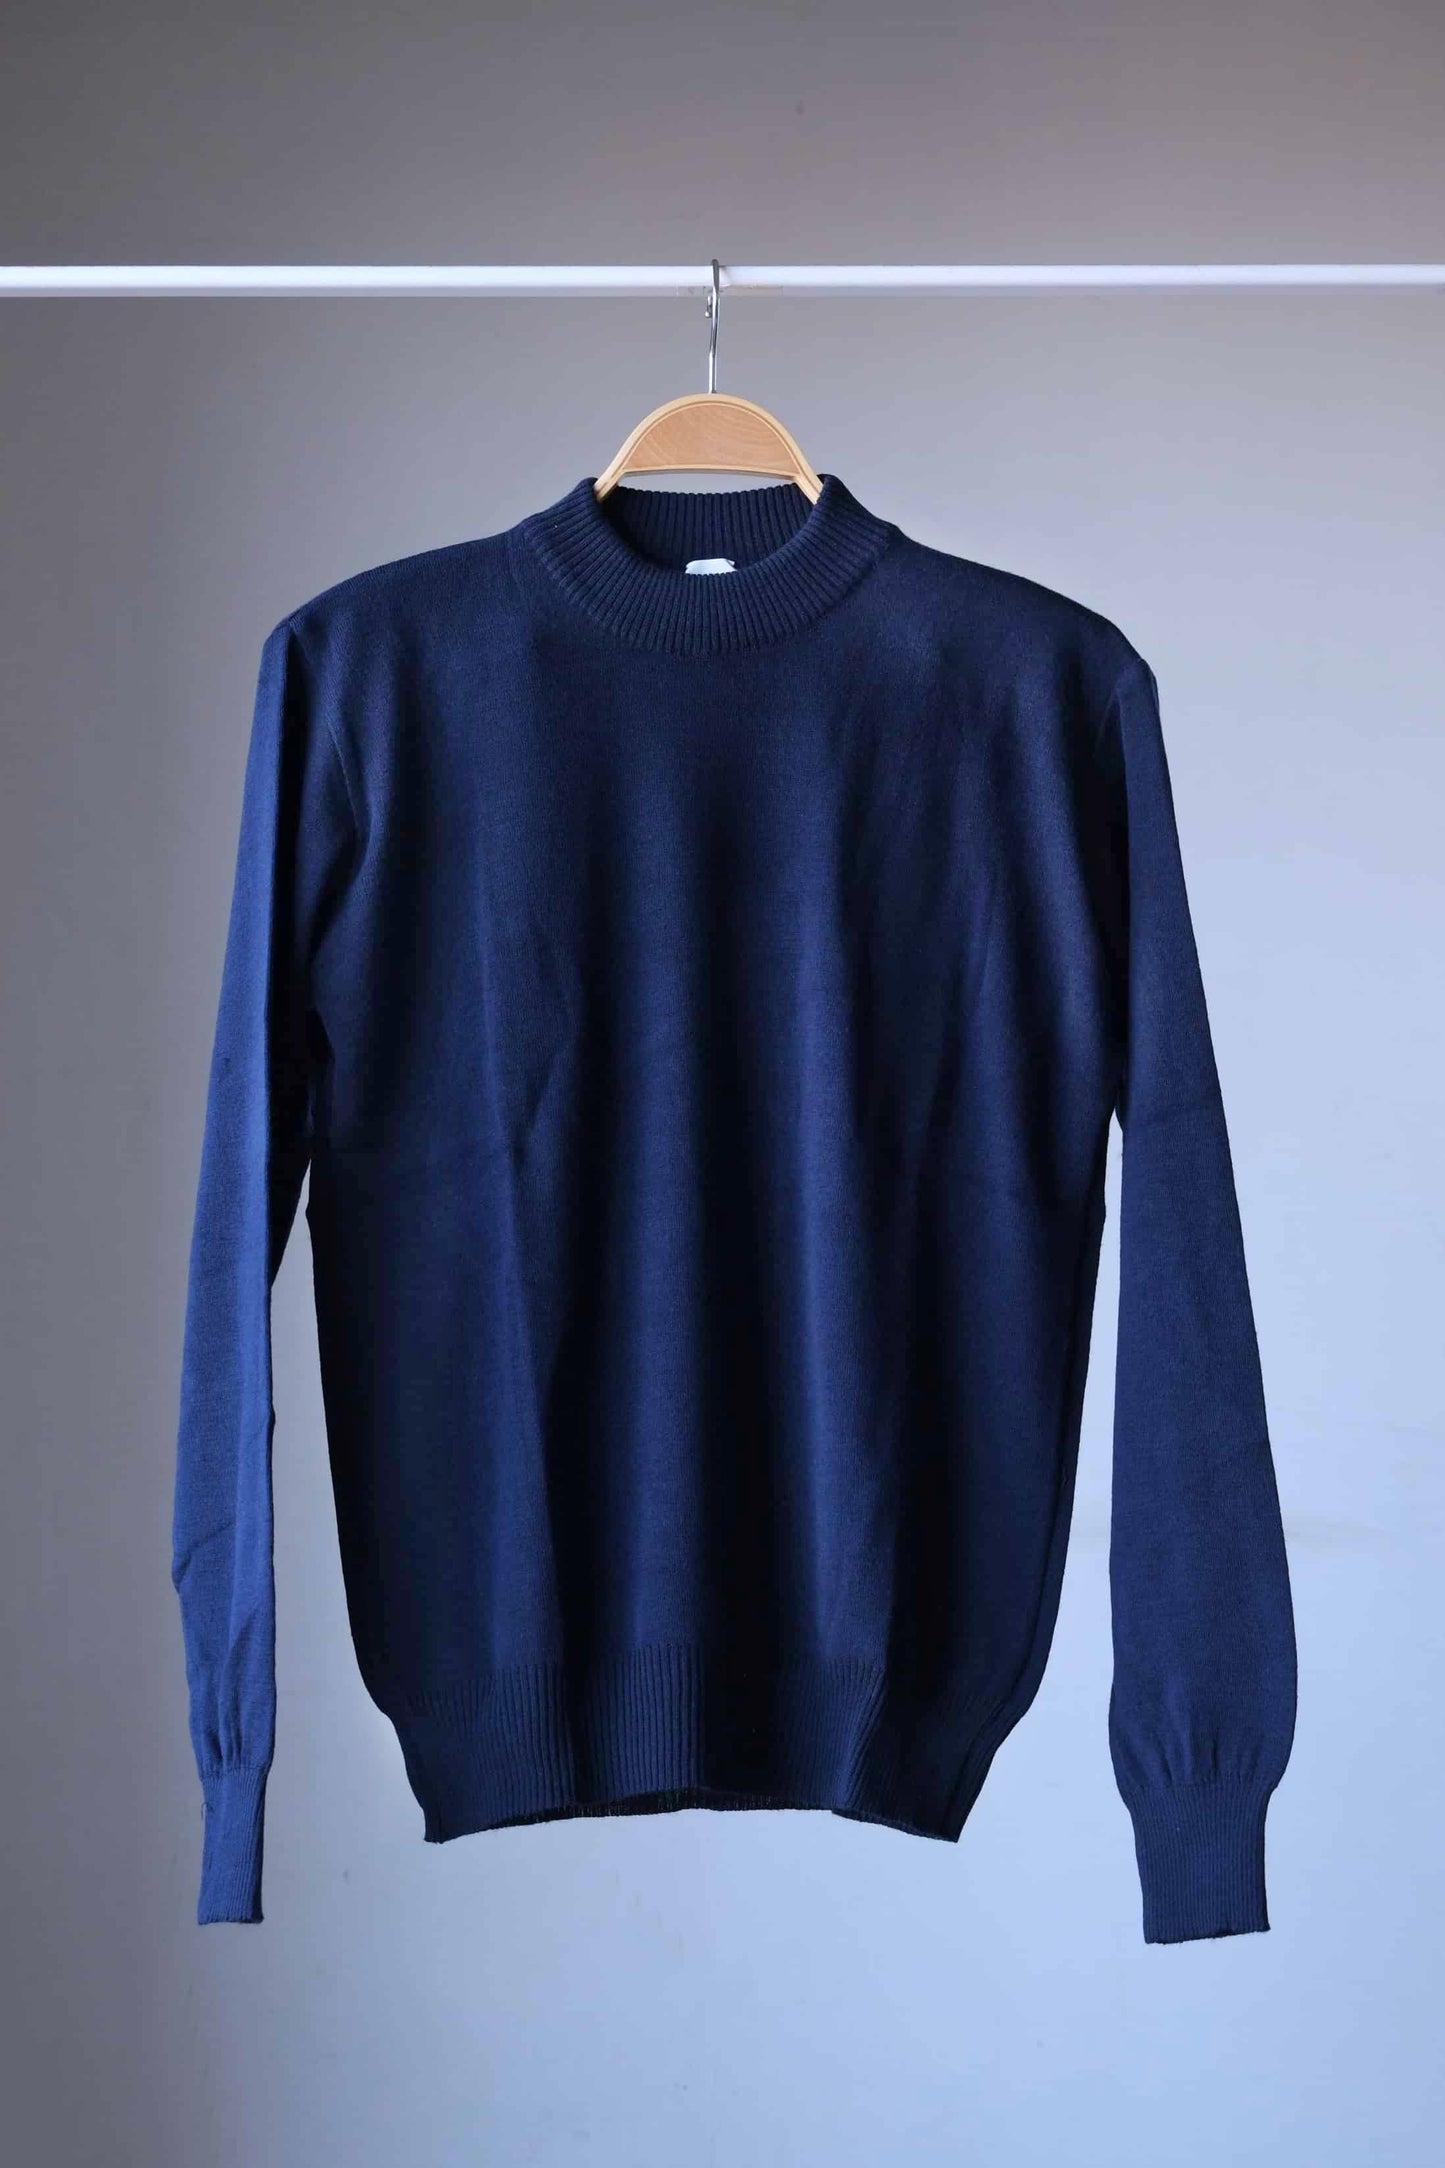 90's Solid High Neck Sweater navy